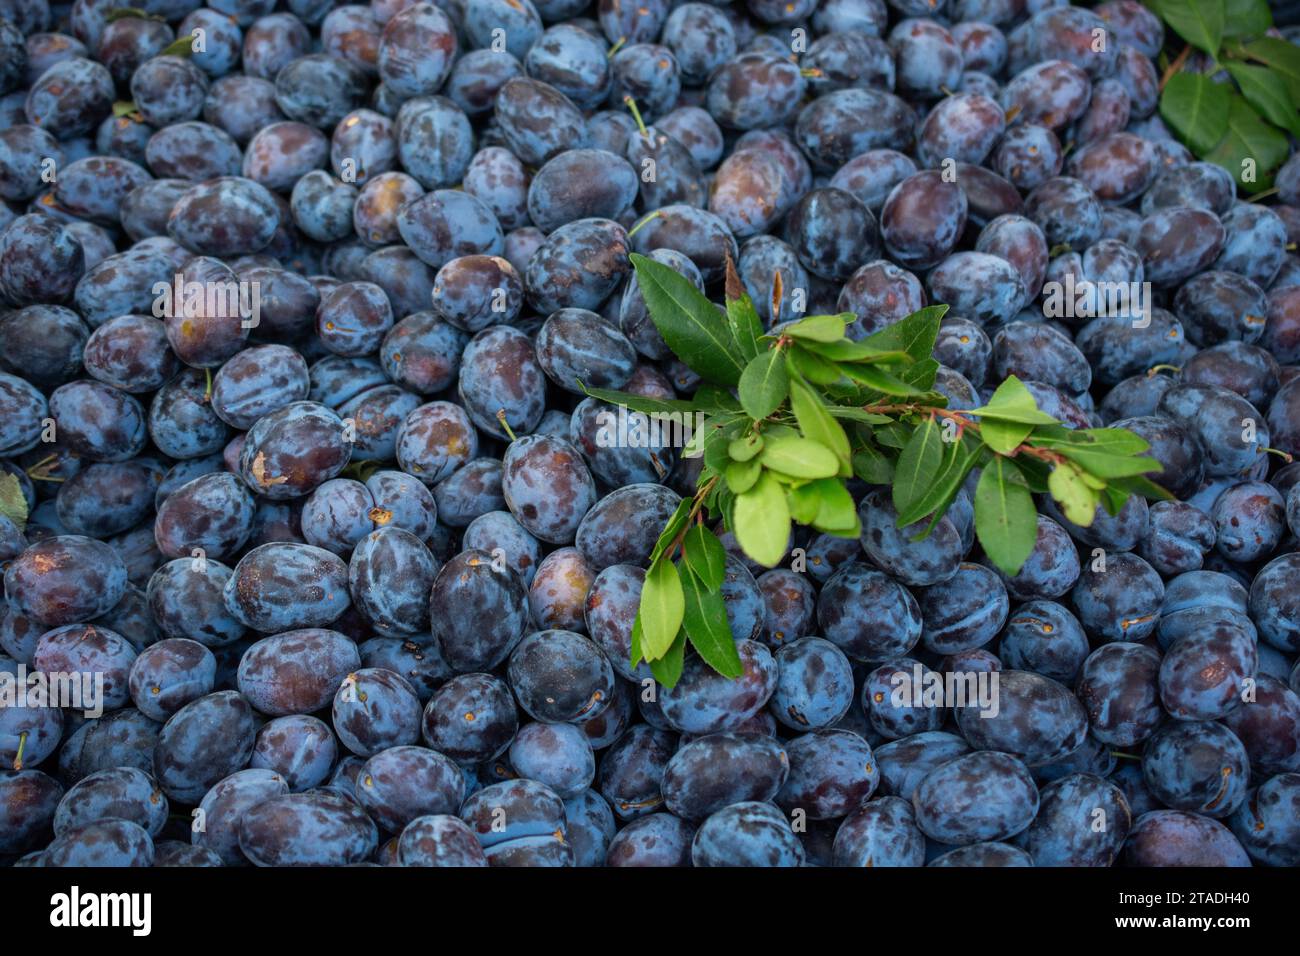 Ripe blue plum fruits harvested in fall as nackground texture Stock Photo